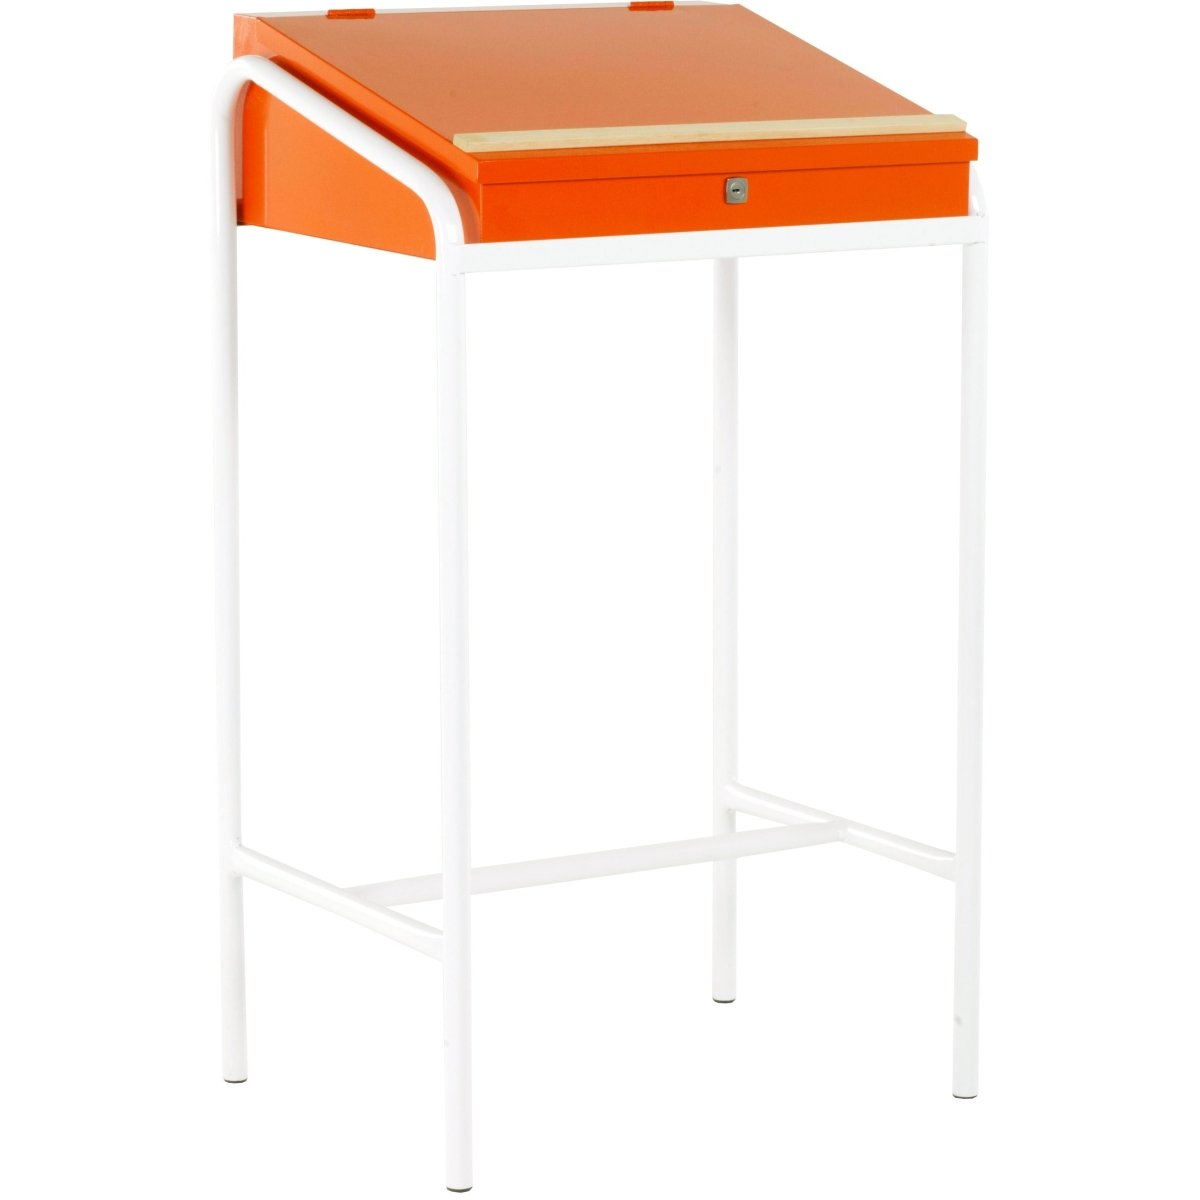 Free Standing Euro Workdesk - Warehouse Storage Products